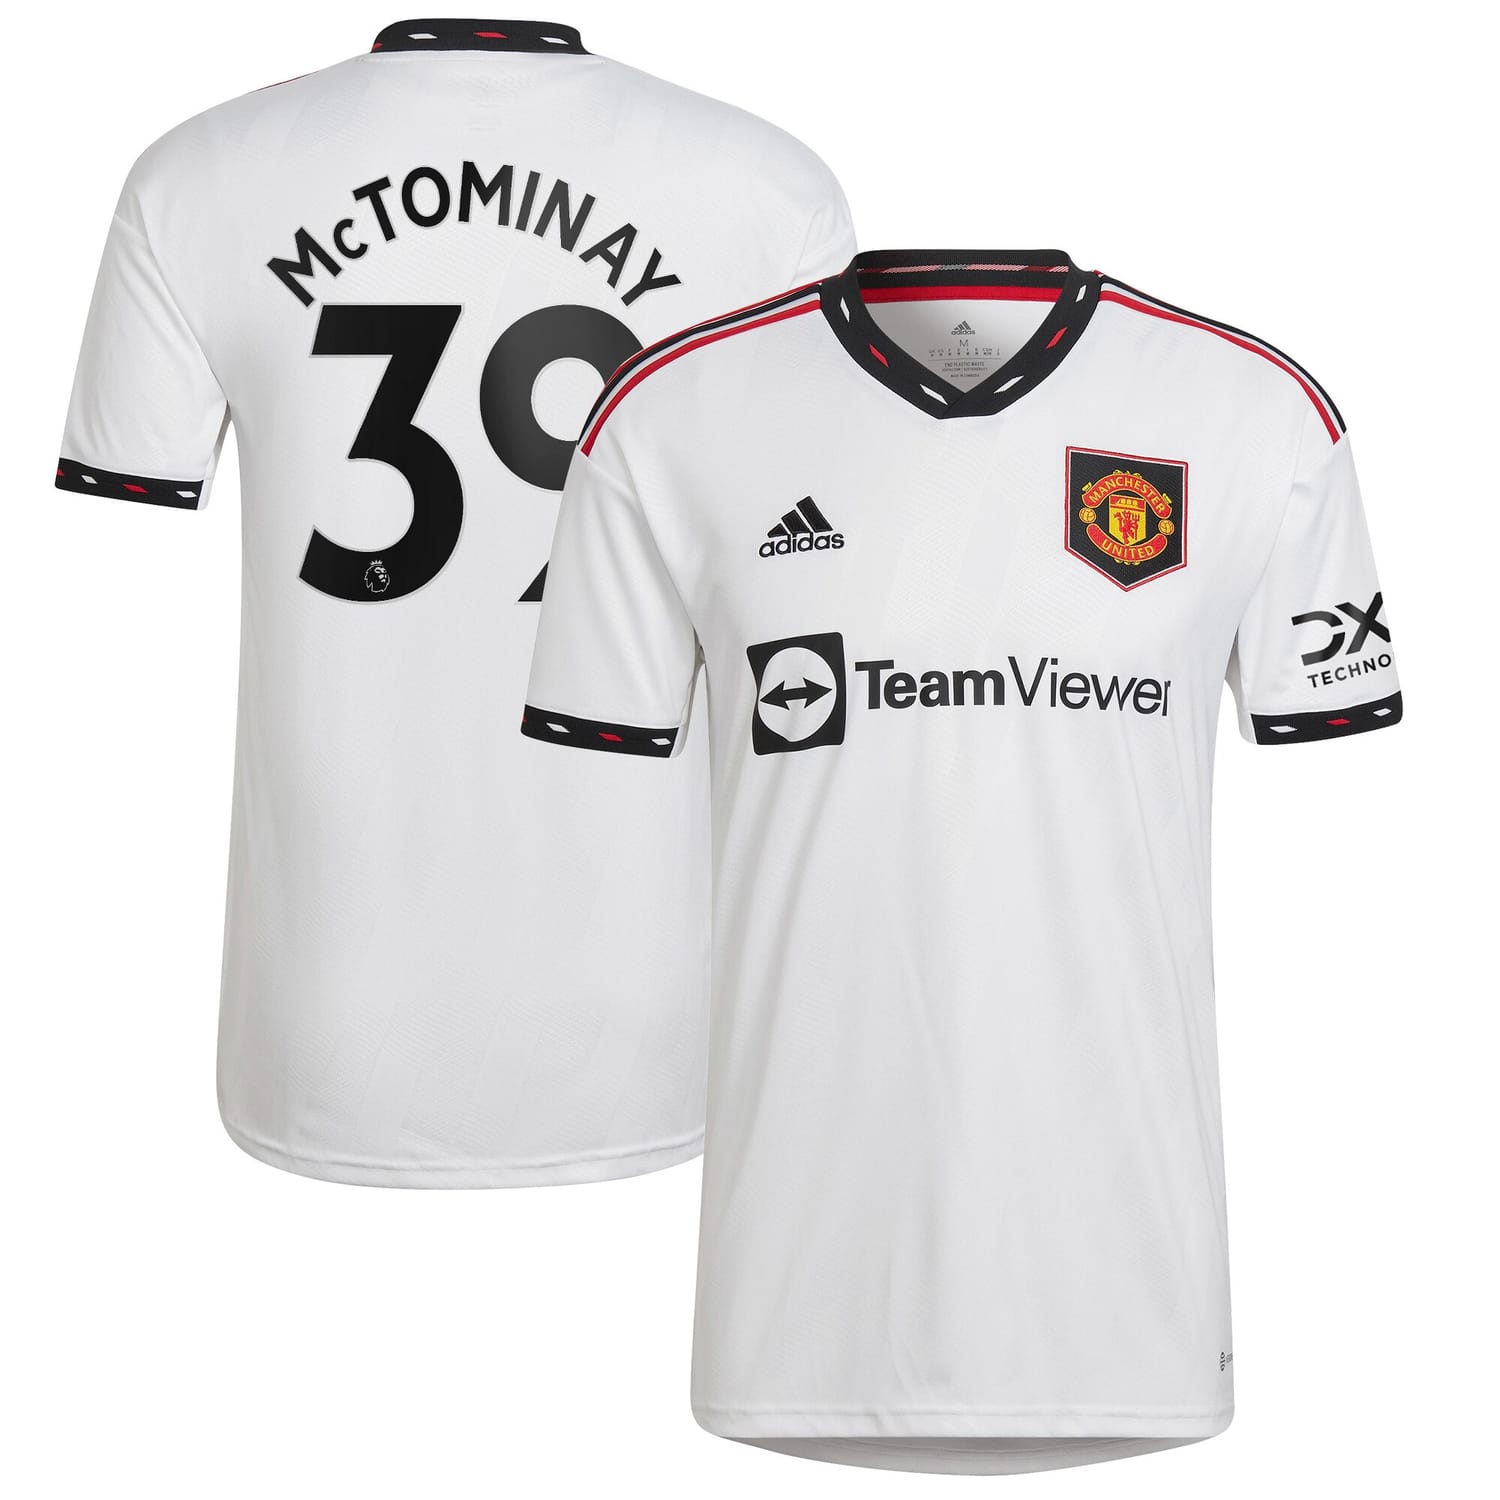 Premier League Manchester United Away Jersey Shirt White 2022-23 player Scott McTominay printing for Men